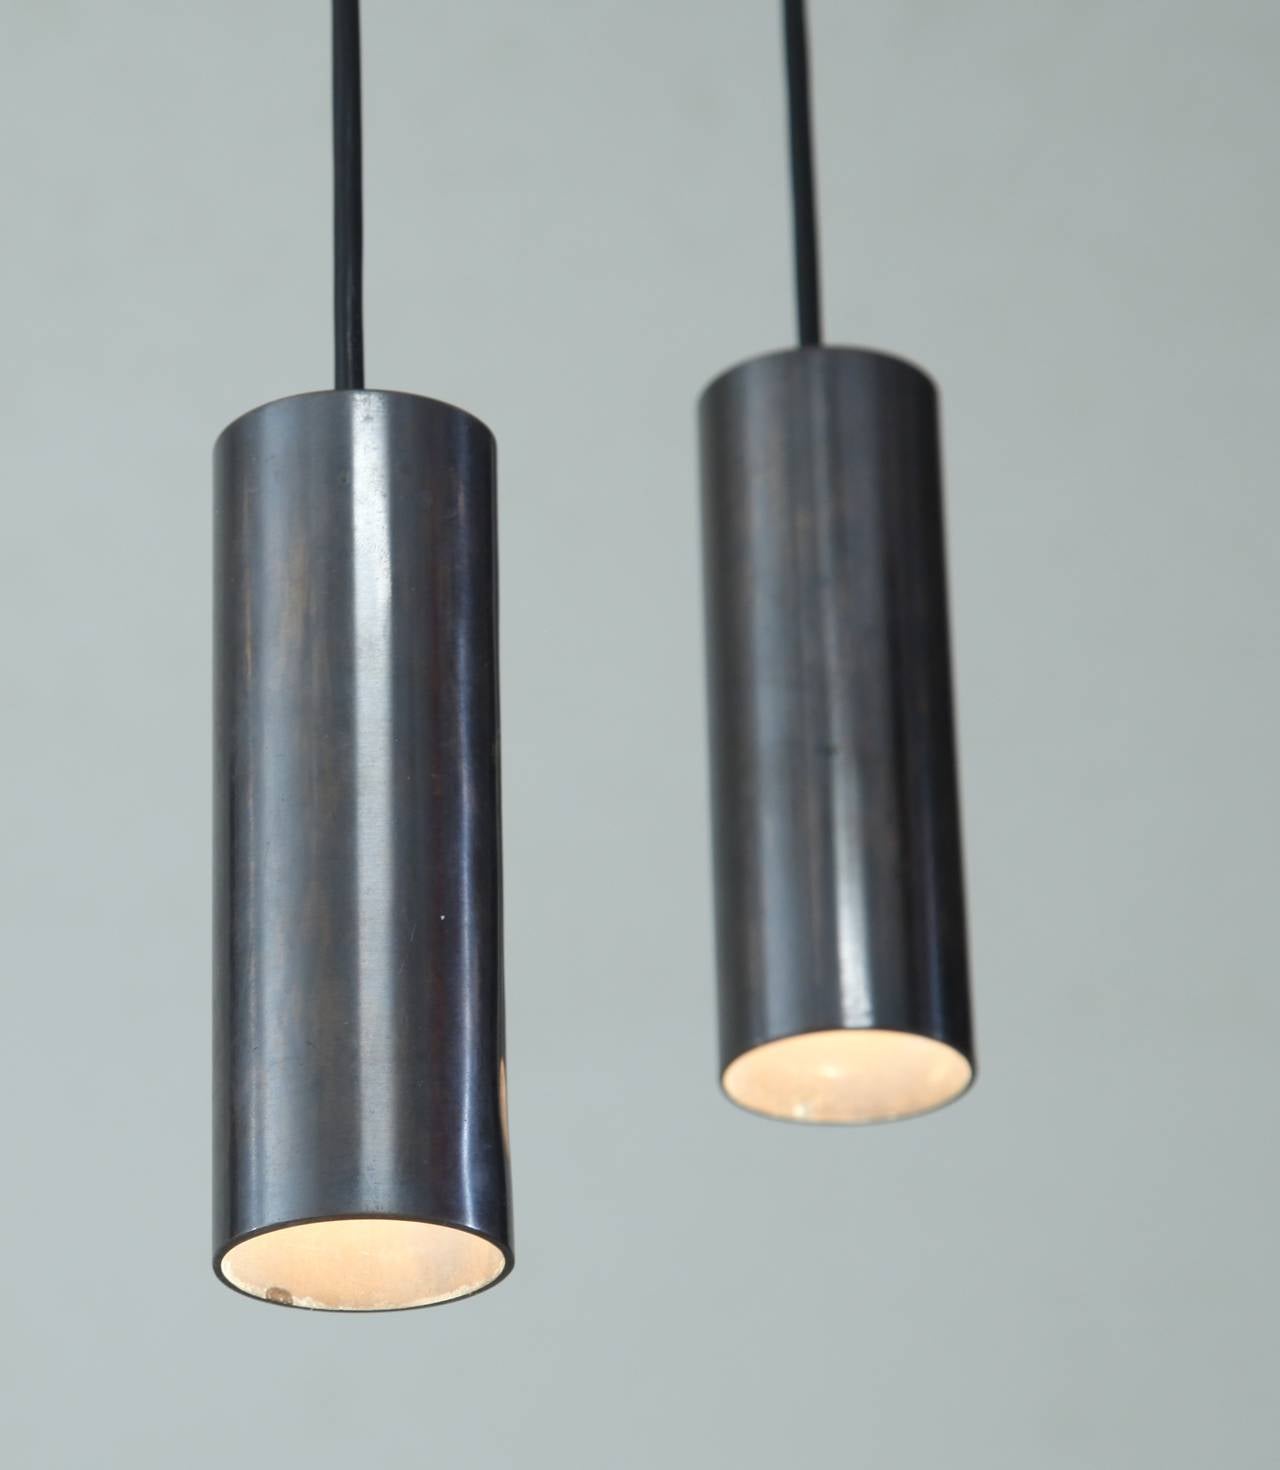 Set of Seven Minimalist Pendant Lamps with Gunmetal Finish, 1960s In Excellent Condition For Sale In Maastricht, NL